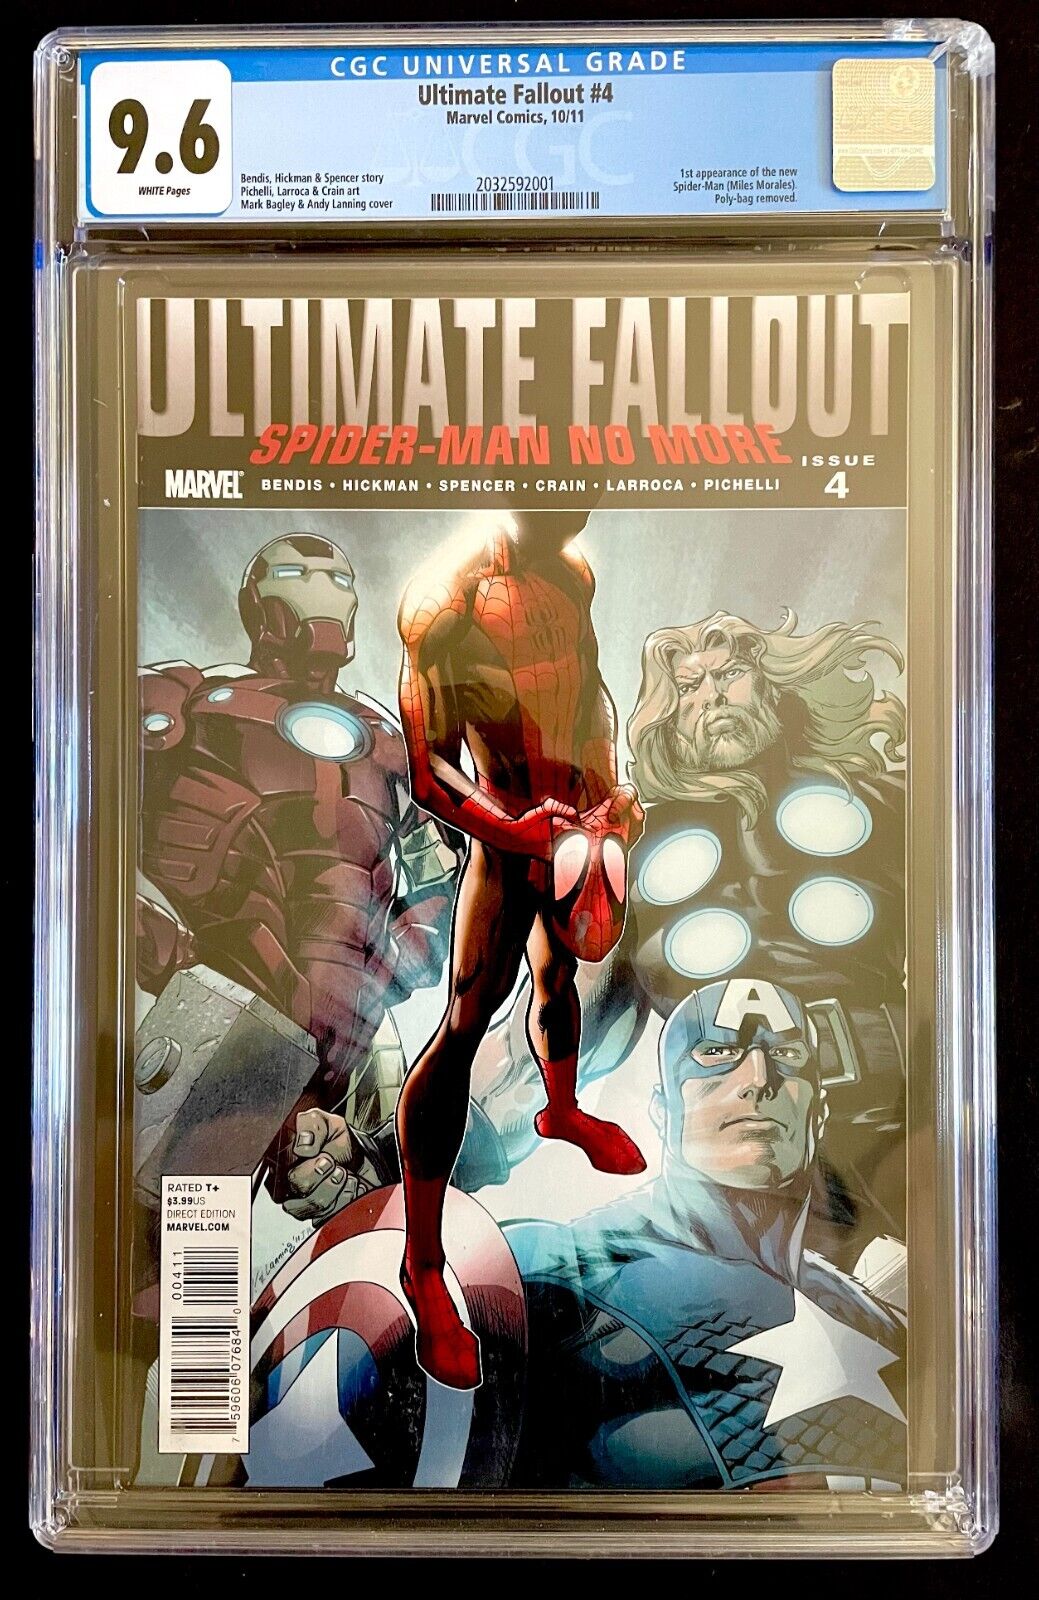 Ultimate Fallout #4 - CGC 9.6 1st appearance Miles Morales as Spider-Man